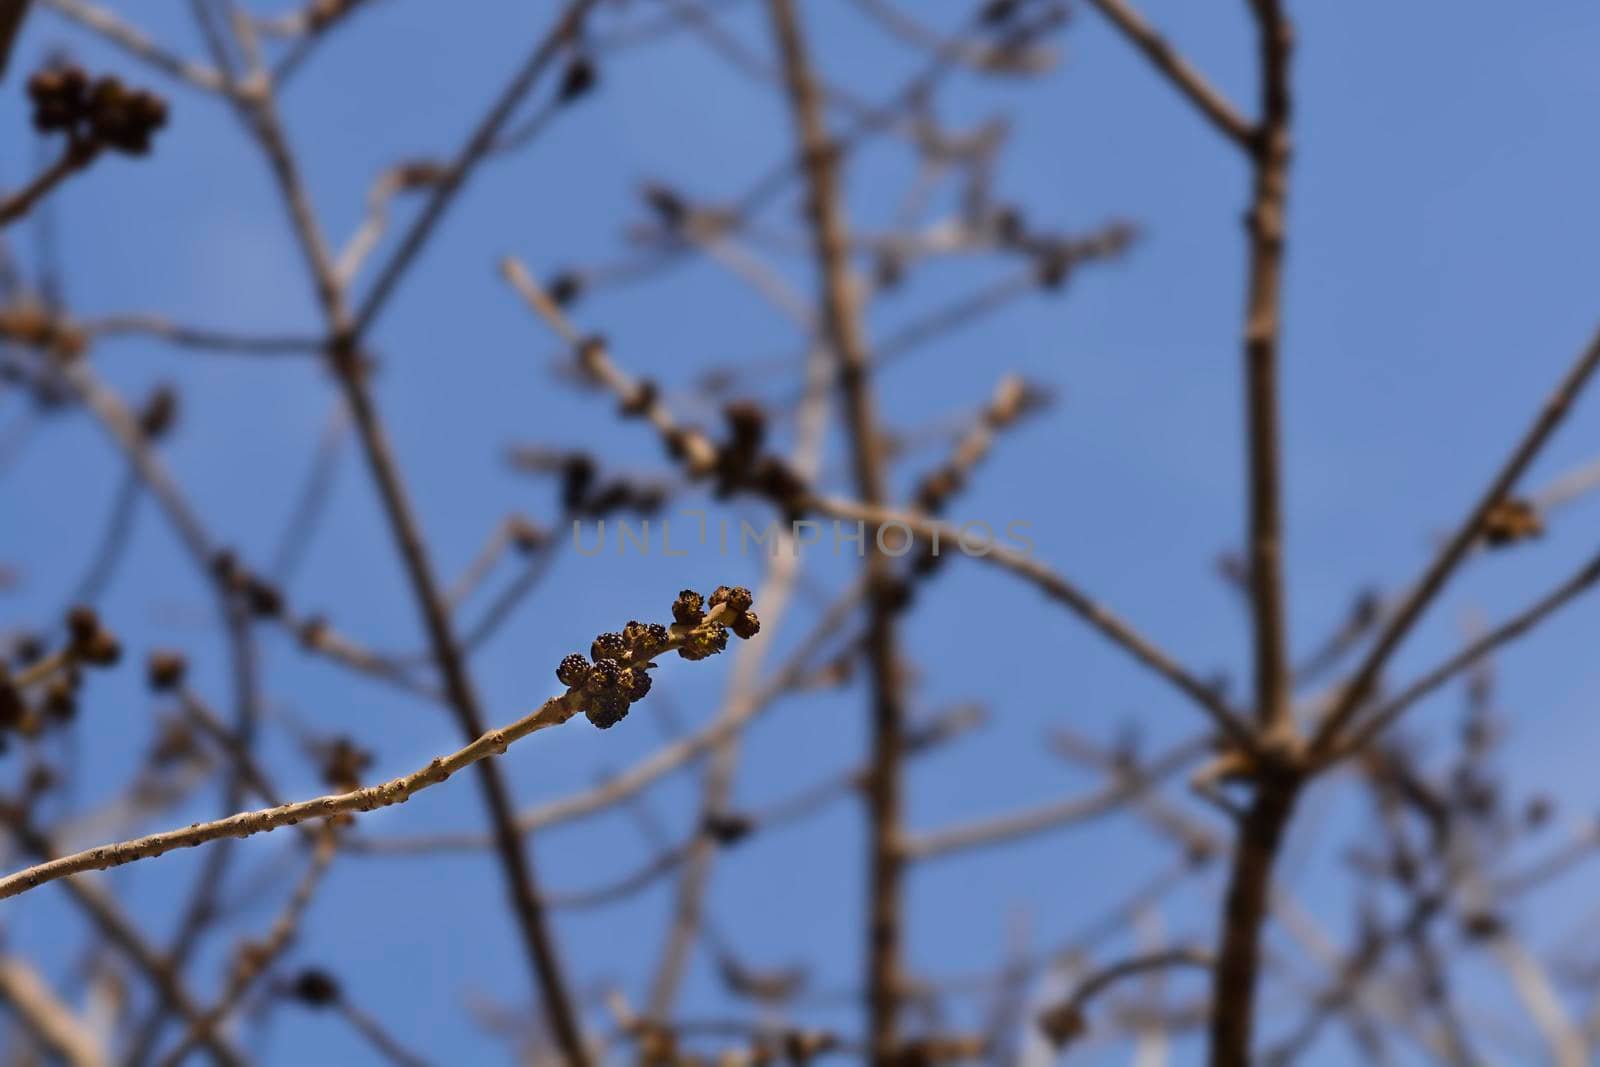 Narrow-leaved ash branches with buds against blue sky - Latin name - Fraxinus angustifolia